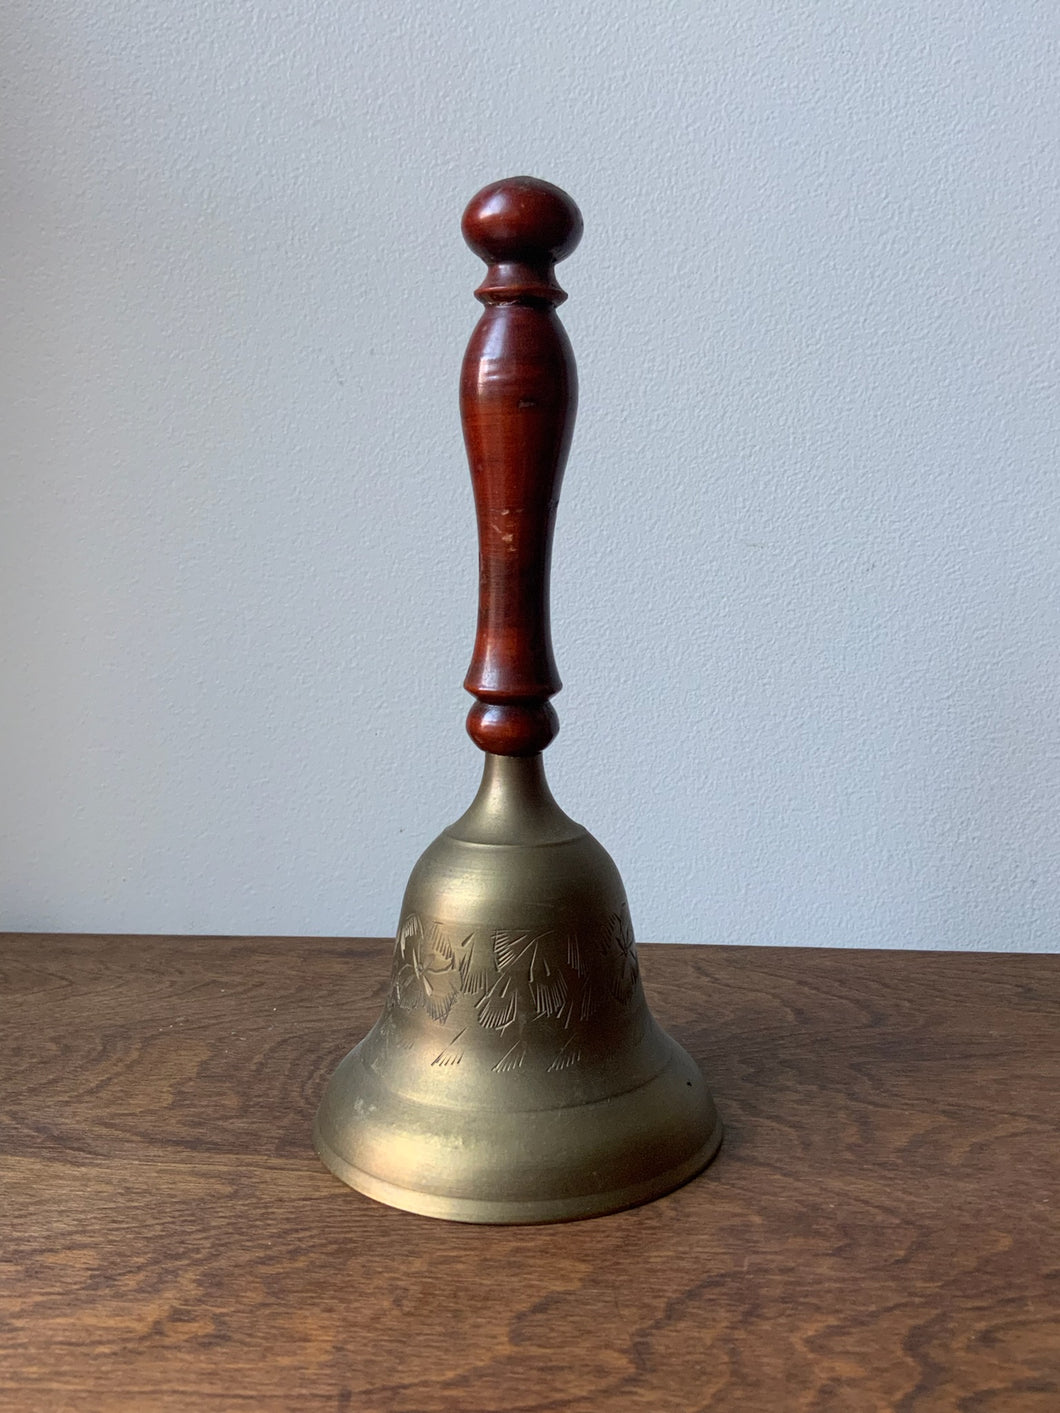 Beautiful Brass Bell with Turned Wood Handle